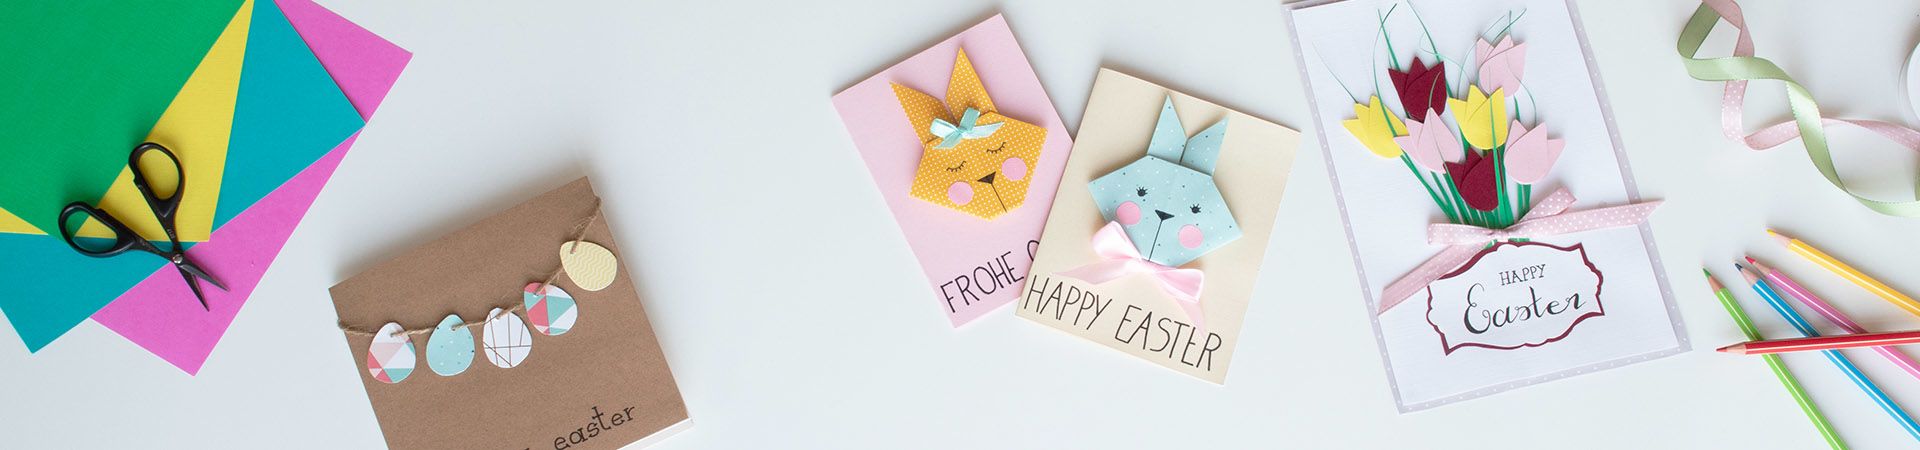 Happy Easter - send happy Easter wishes in a homemade Easter card.